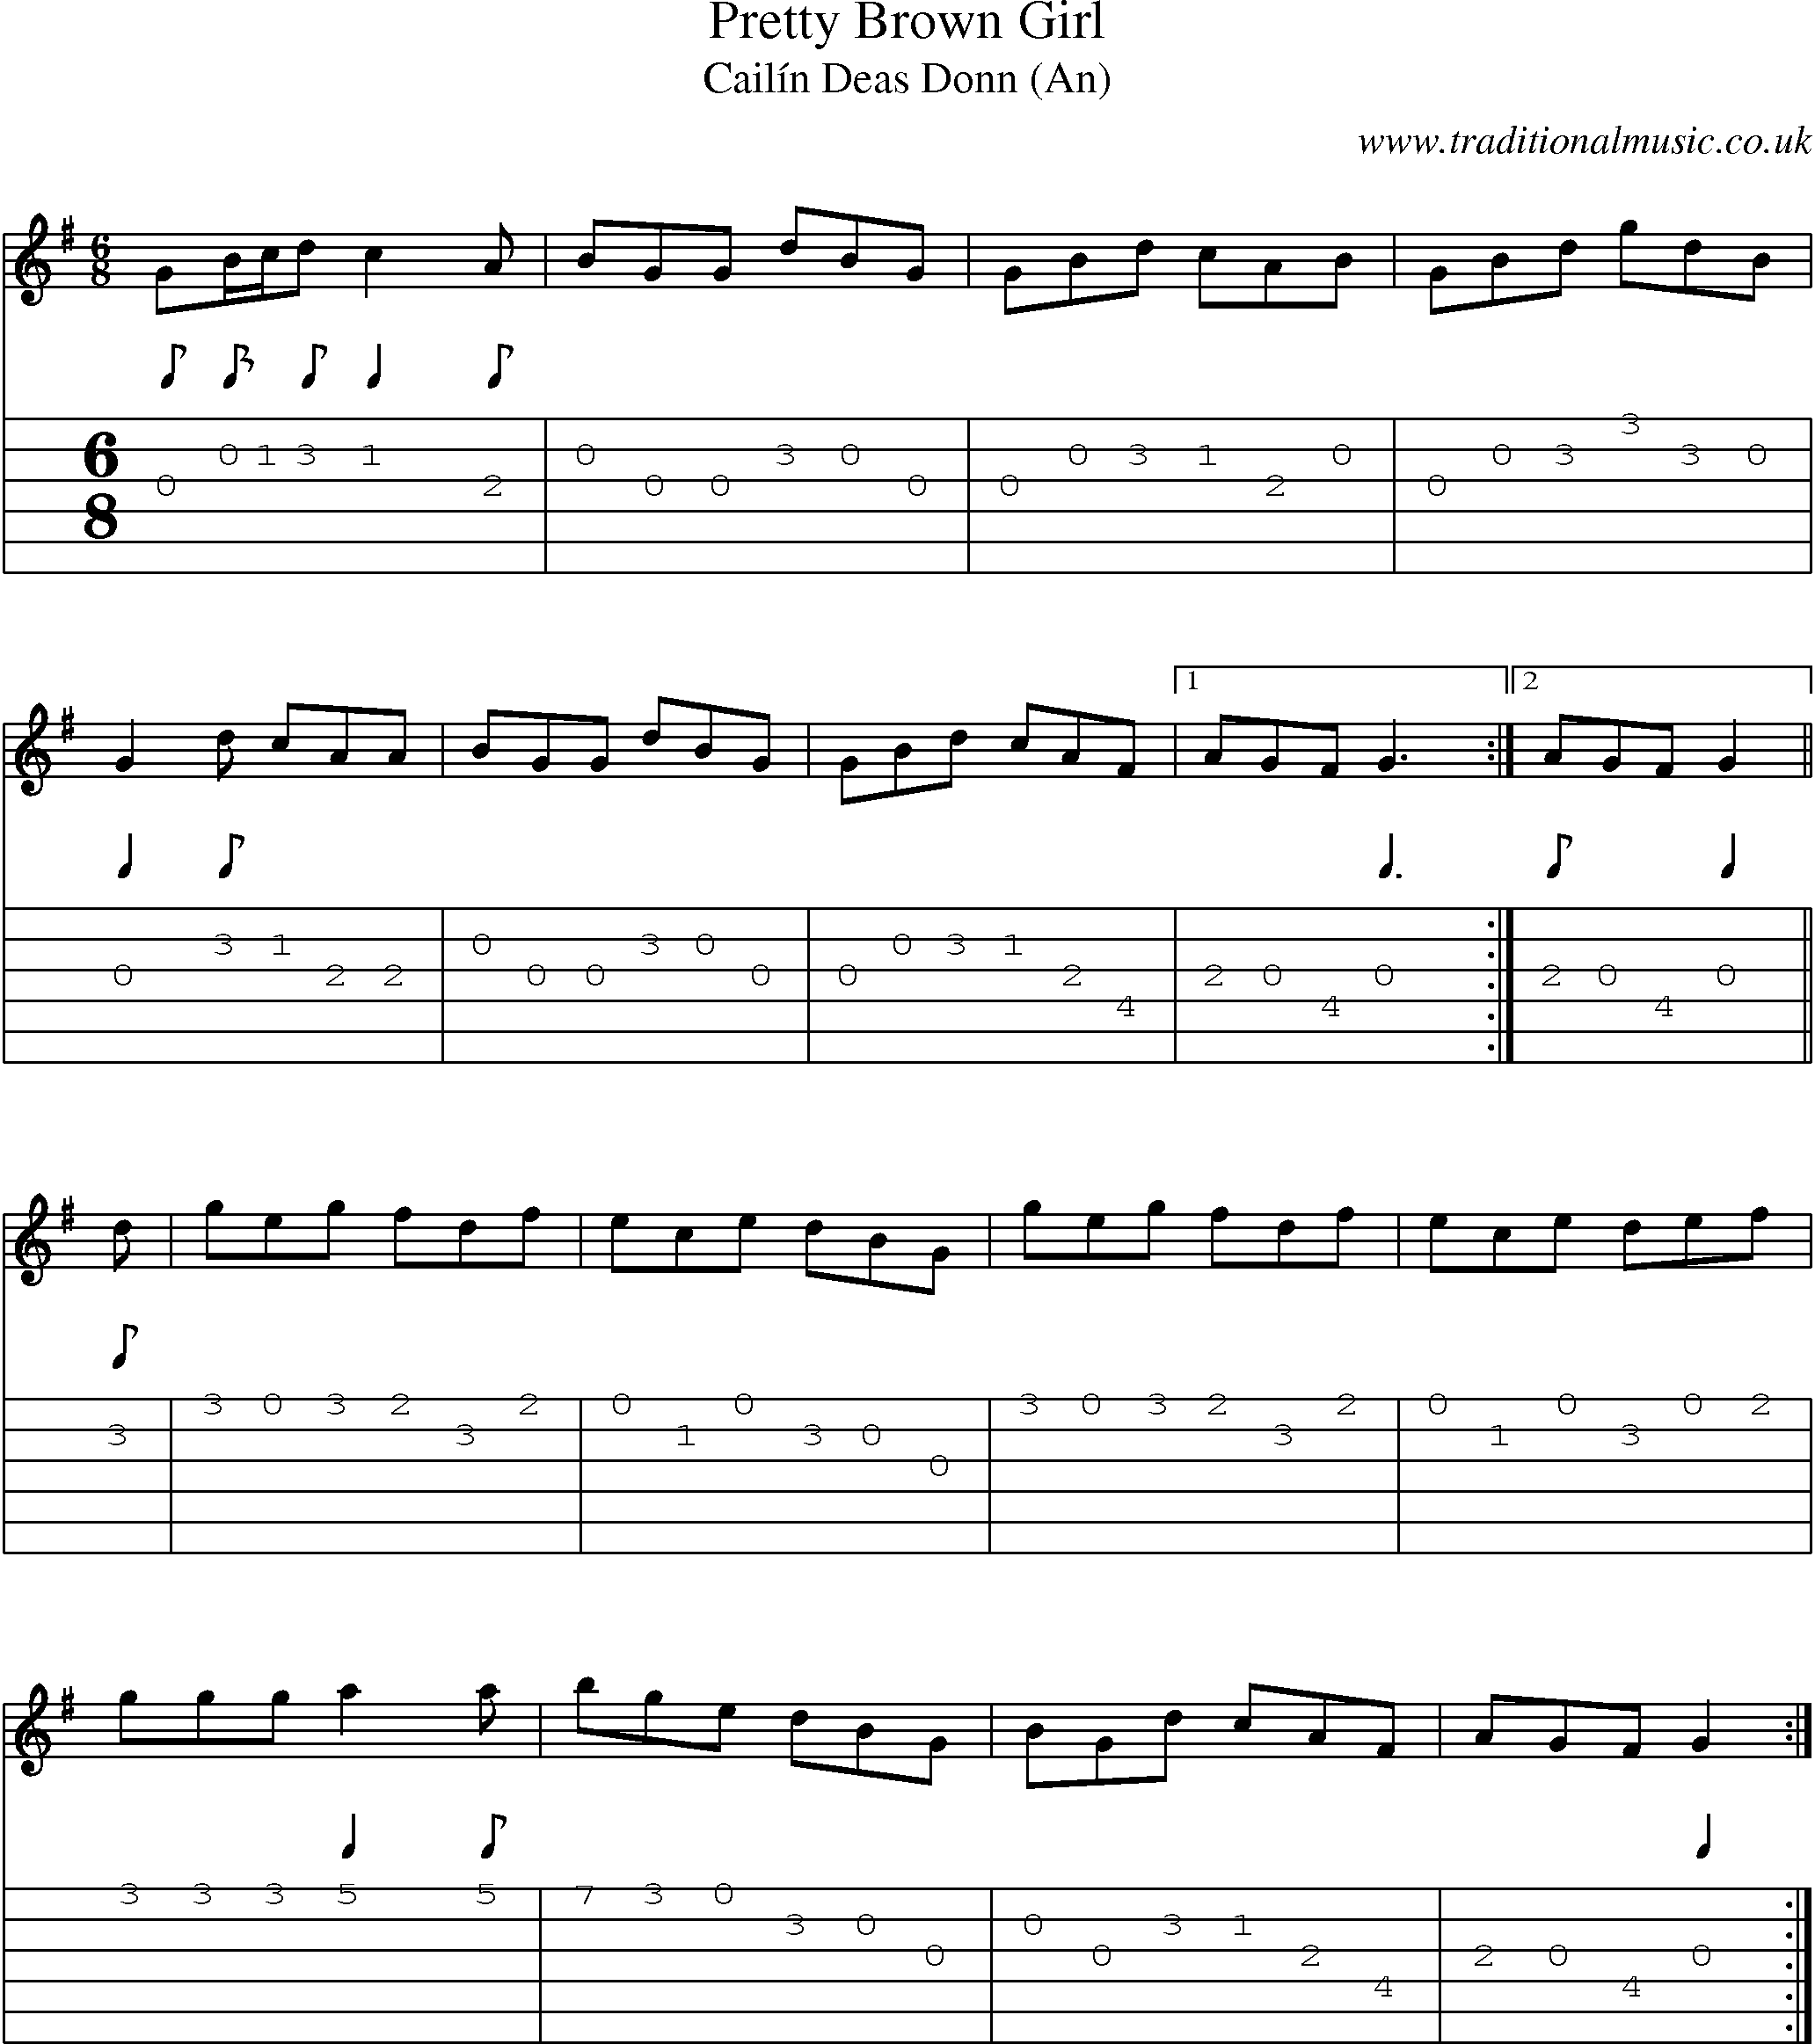 Music Score and Guitar Tabs for Pretty Brown Girl